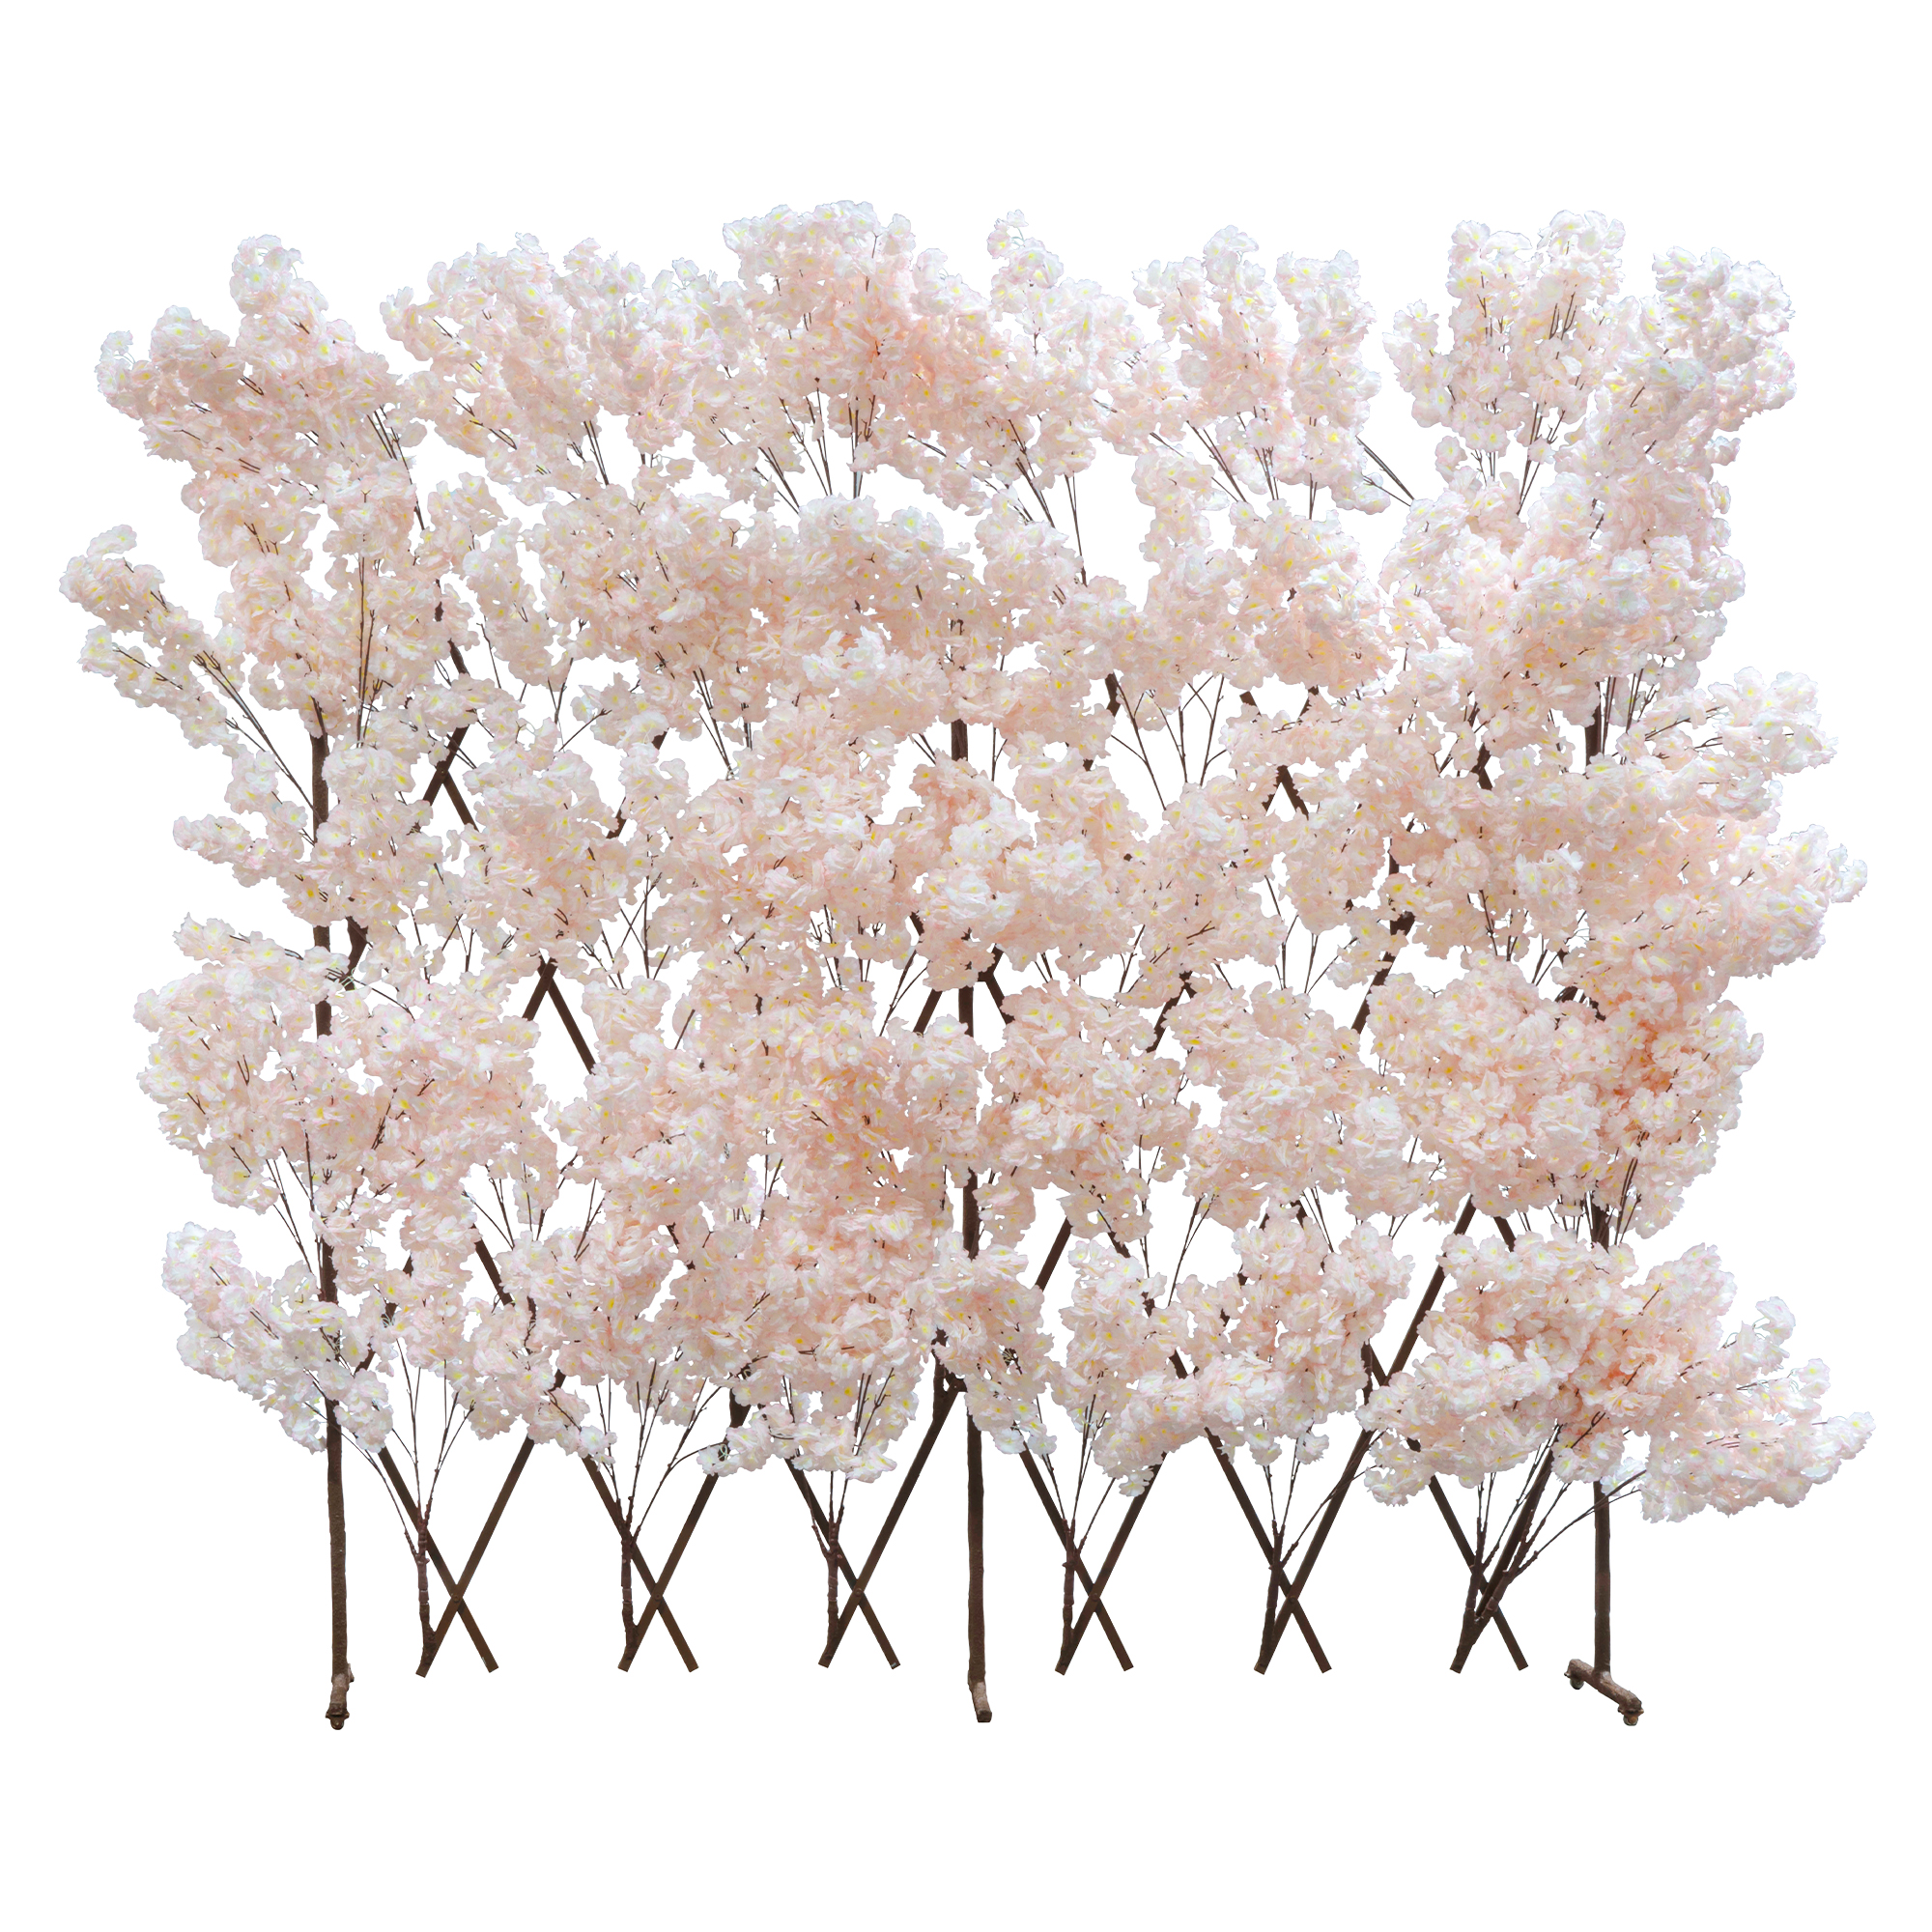 Expandable Cherry Blossom Backdrop Wall With Wheels - Pink